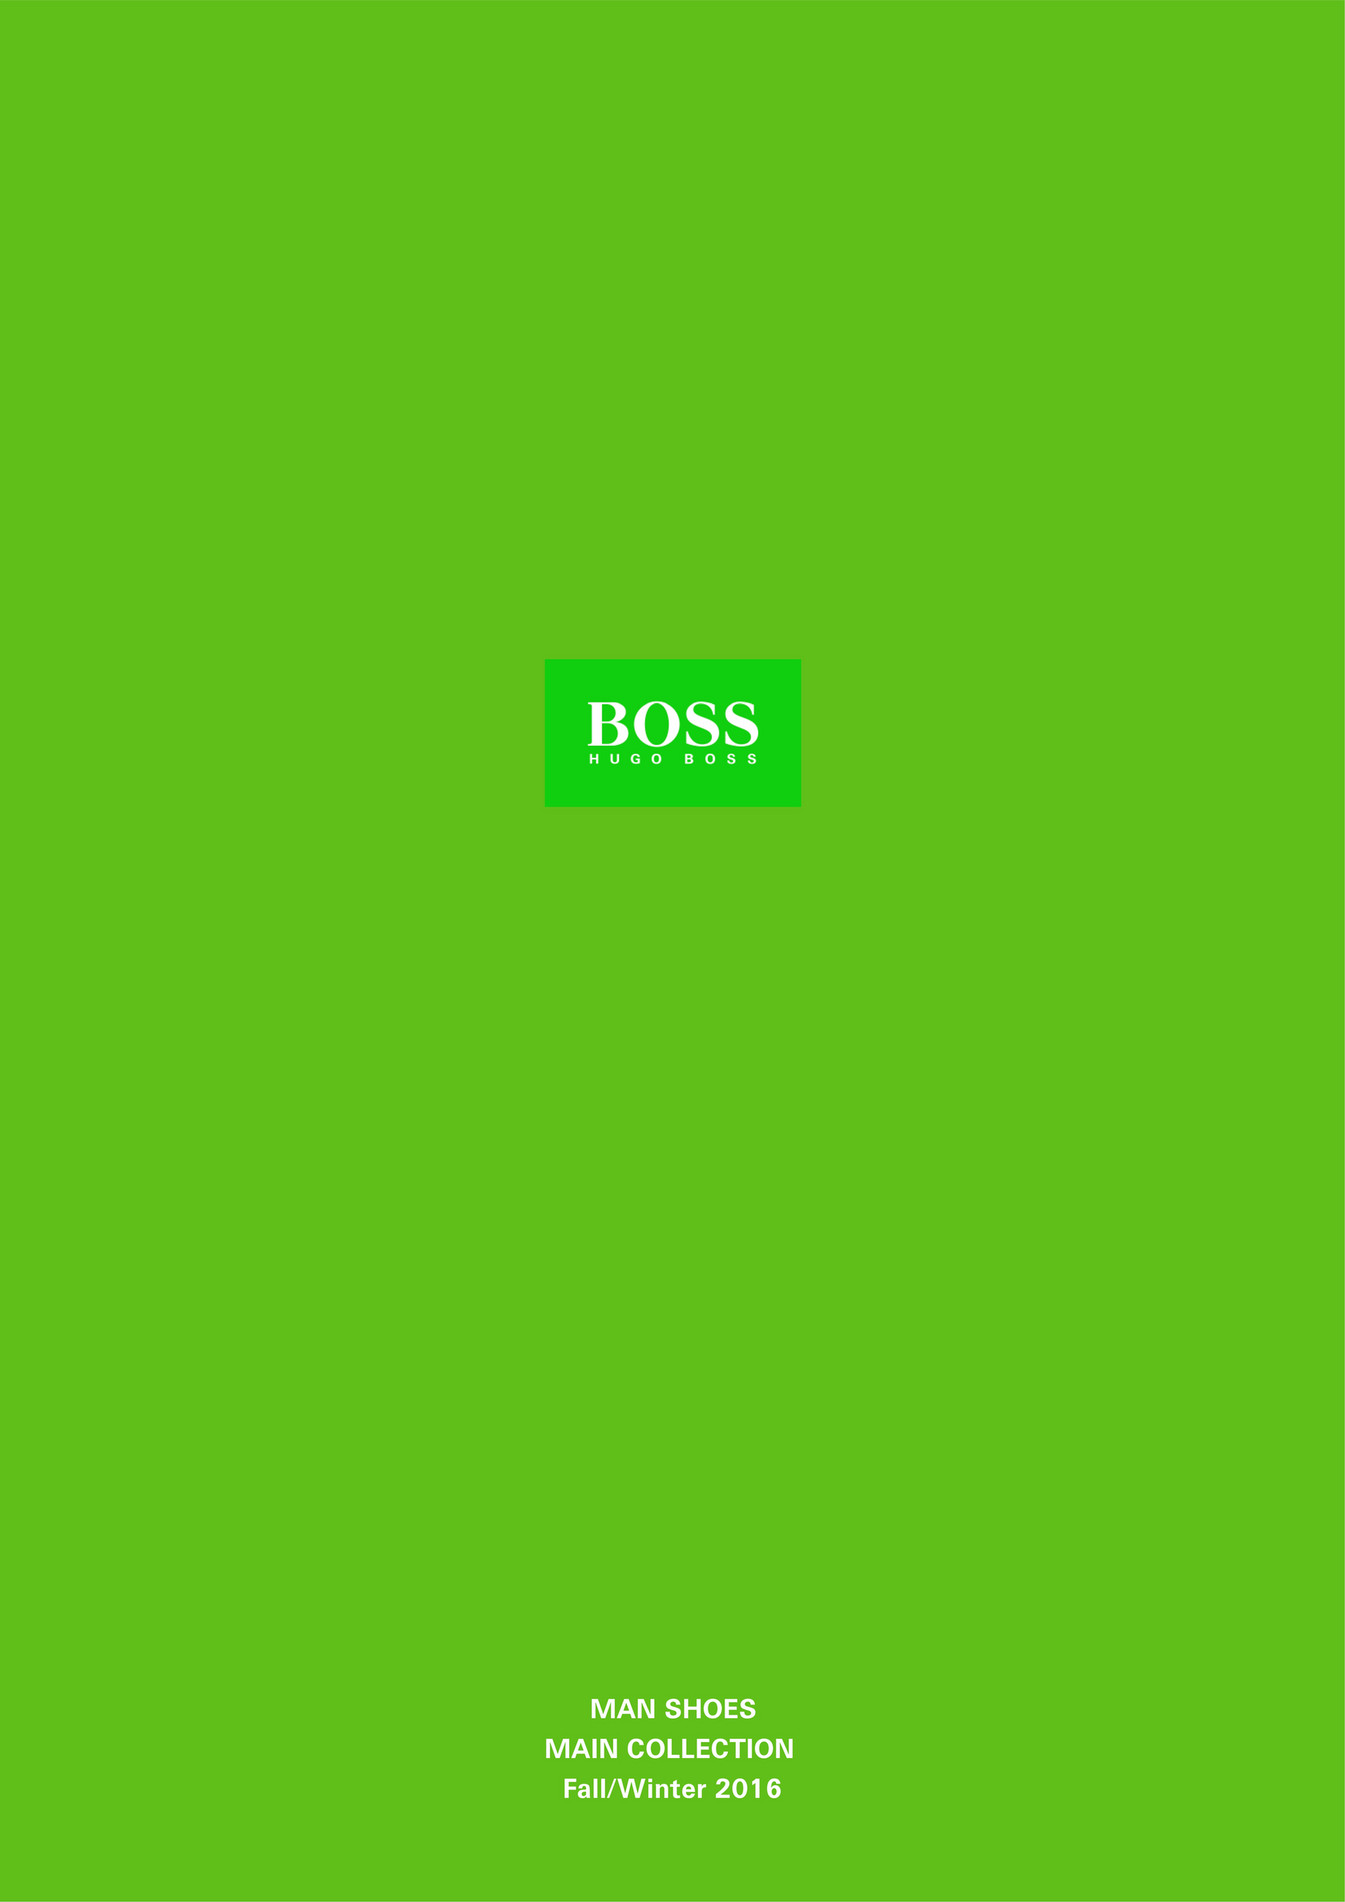 Fabel infrastruktur linse CATALOGS - HUGO BOSS W16FW GREEN MAN SHOES - with pricing - Page 4-5 -  Created with Publitas.com